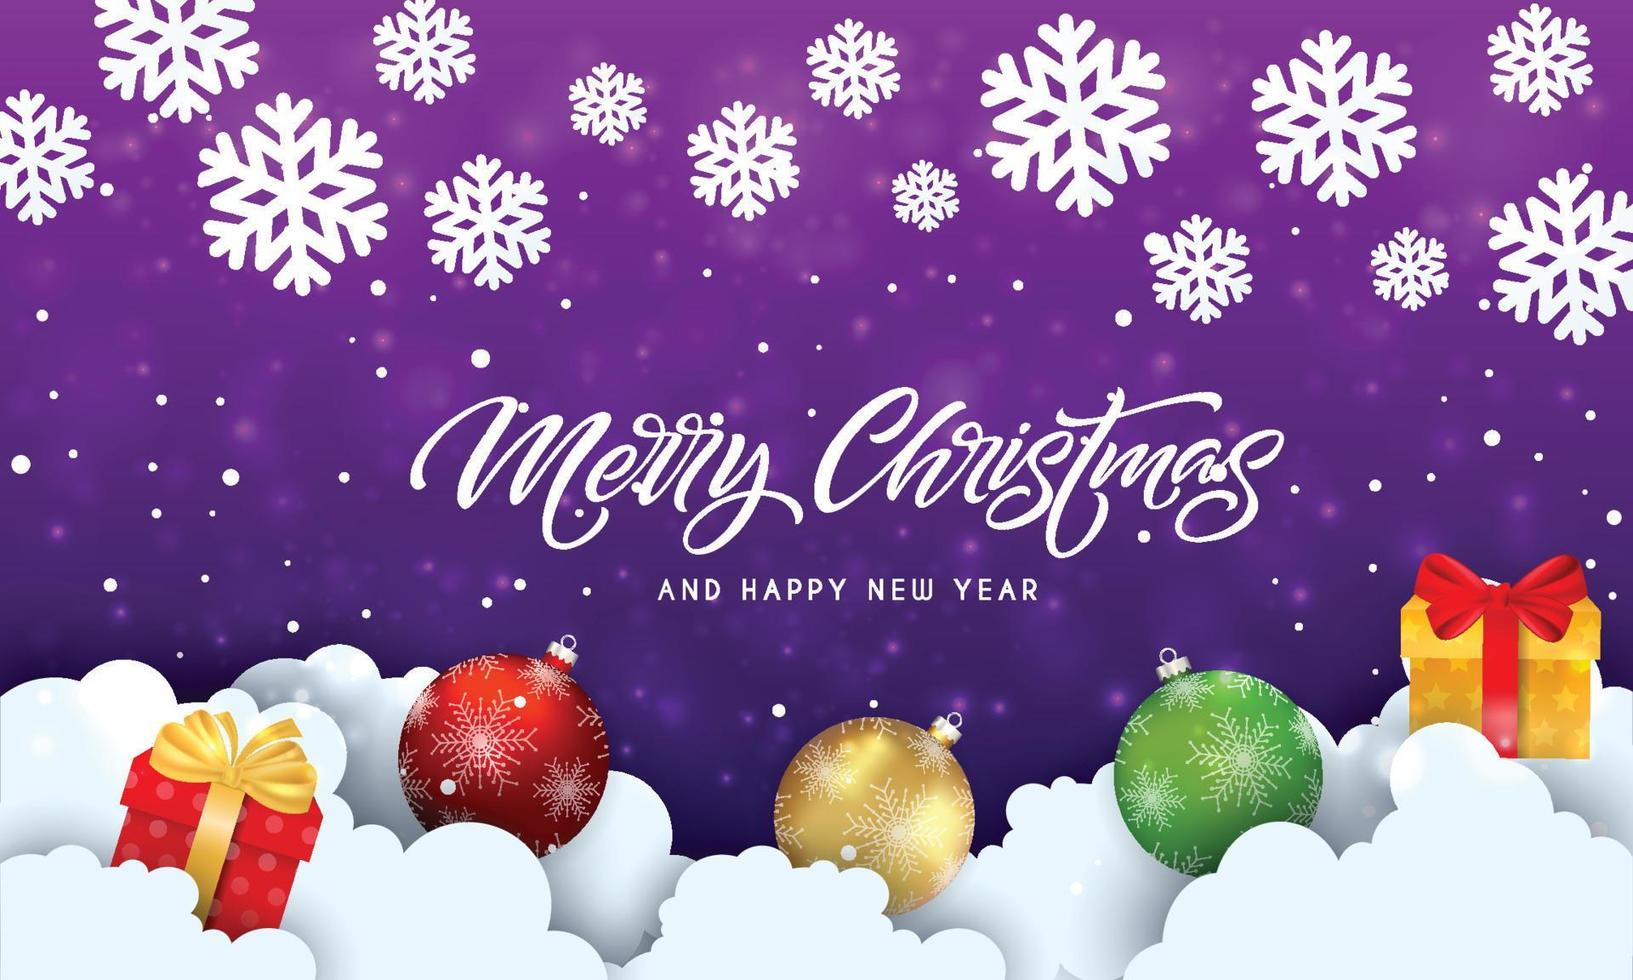 Vector Realistic Christmas Ball on Purple Background with Golden Modern Typography Greetings in a Frame. Classy Card or Poster.